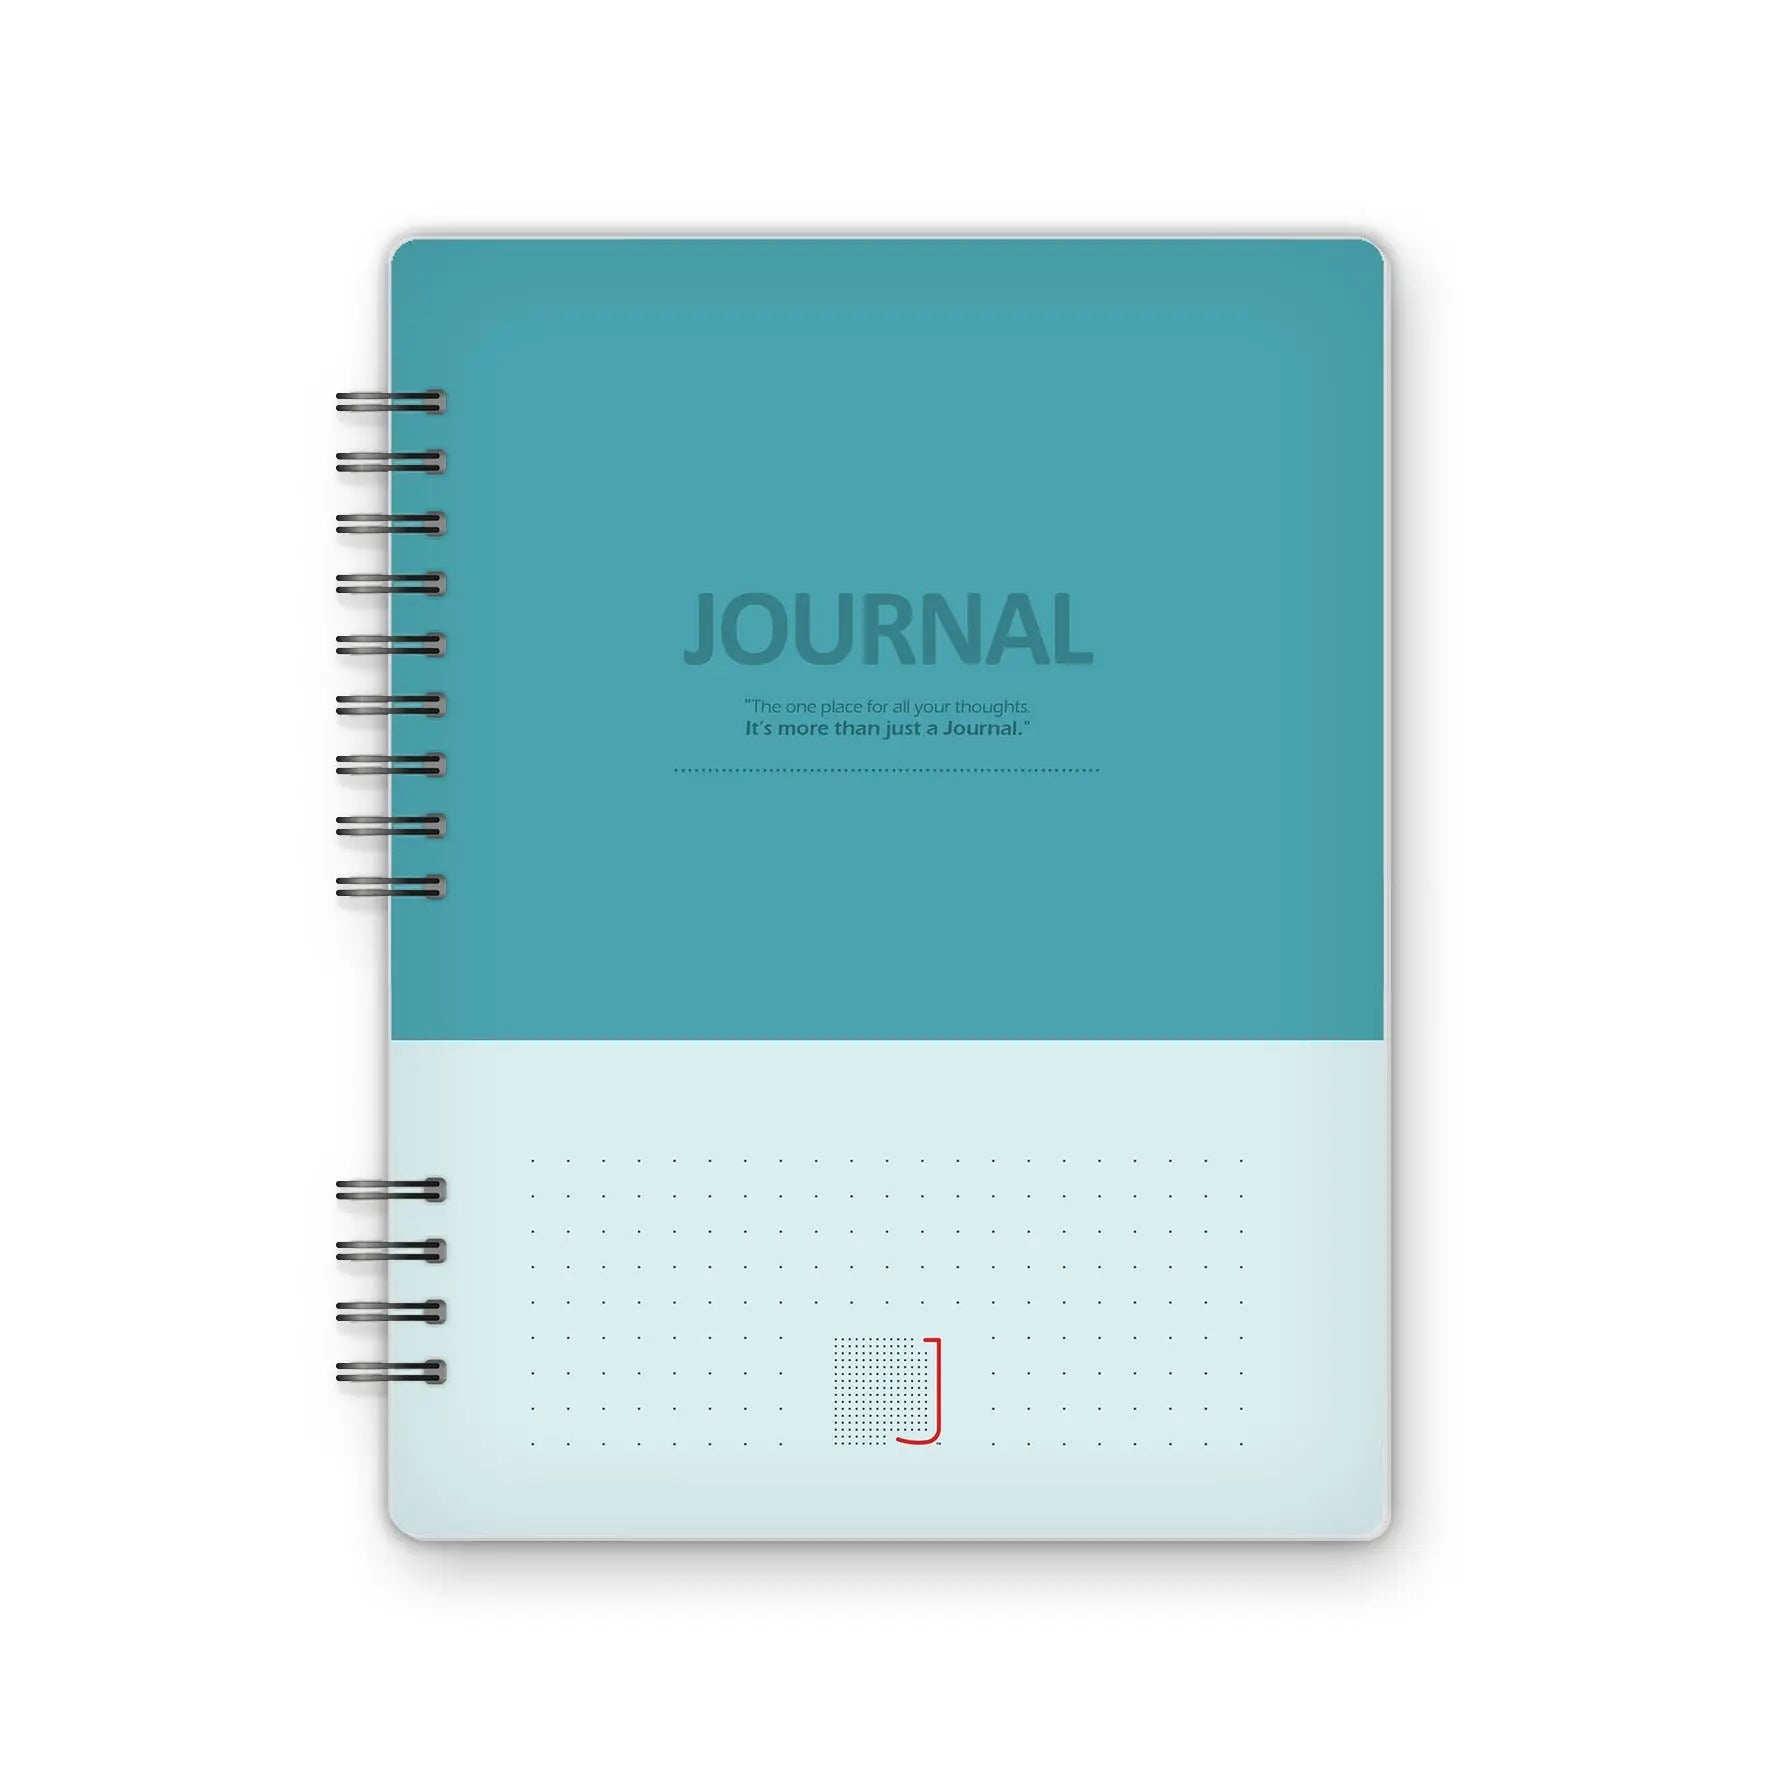 Journal - 18X14 cm - 75 Sheets | Teal - from Journals